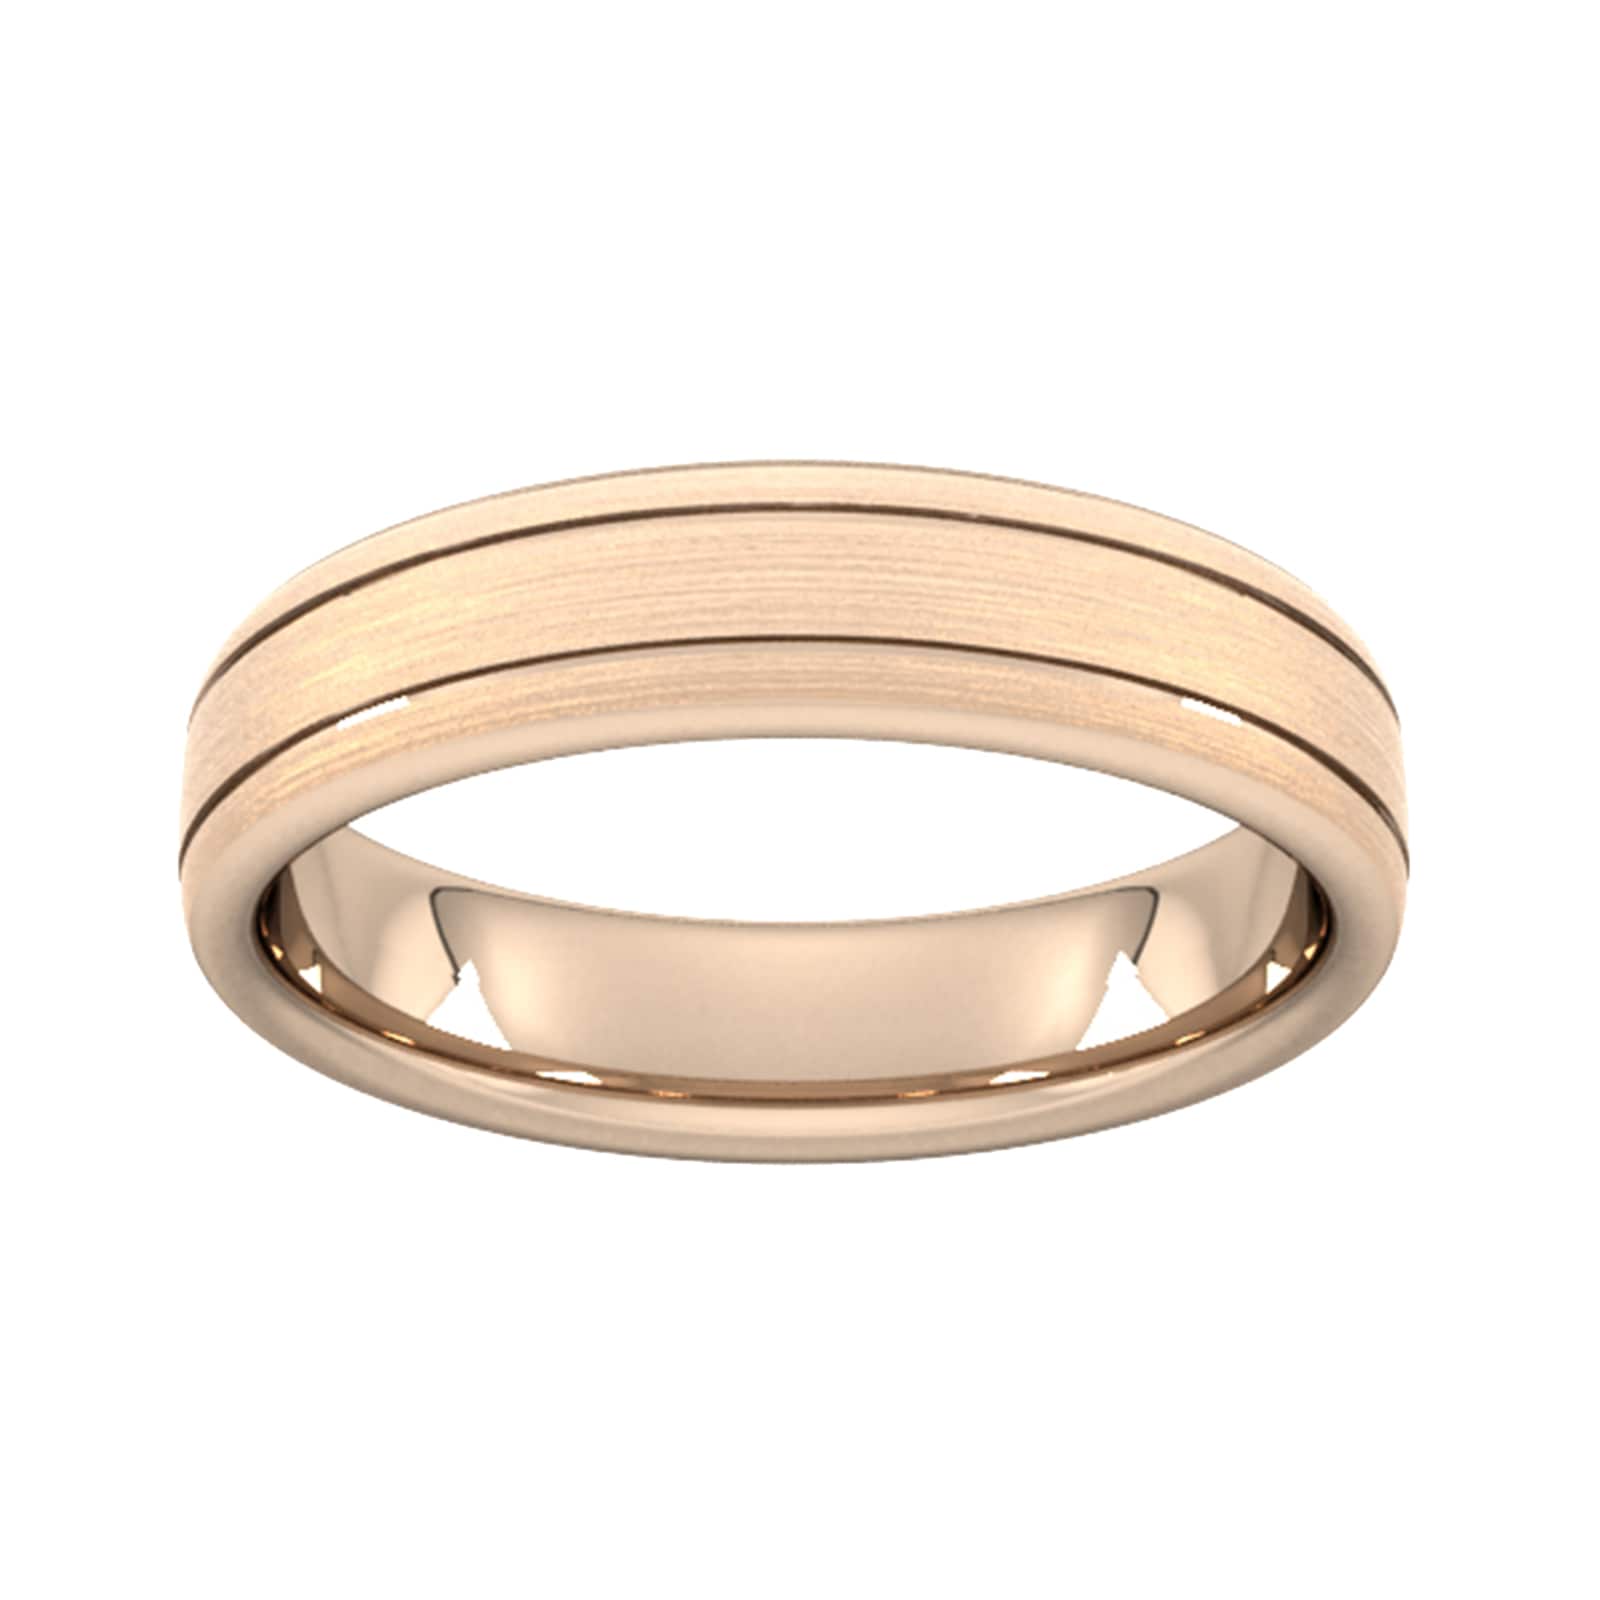 5mm Slight Court Standard Matt Finish With Double Grooves Wedding Ring In 18 Carat Rose Gold - Ring Size U